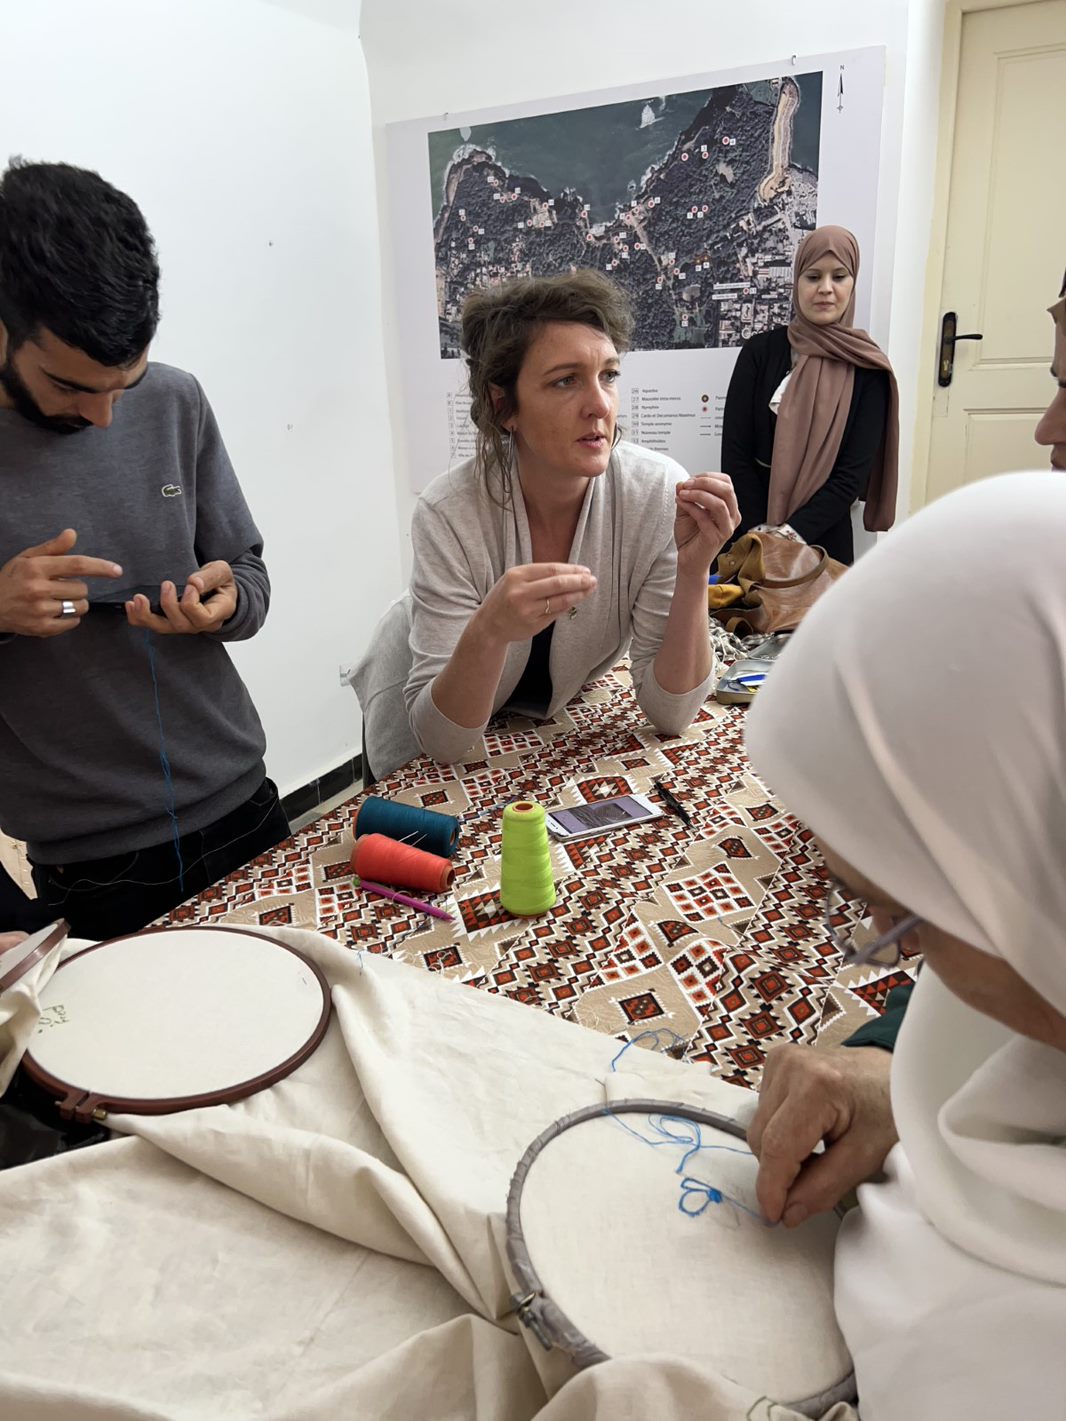 Also in Tipaza, Fayle led an embroidery workshop with the same group in which they all worked on elements of the same overall piece, a tablecloth.